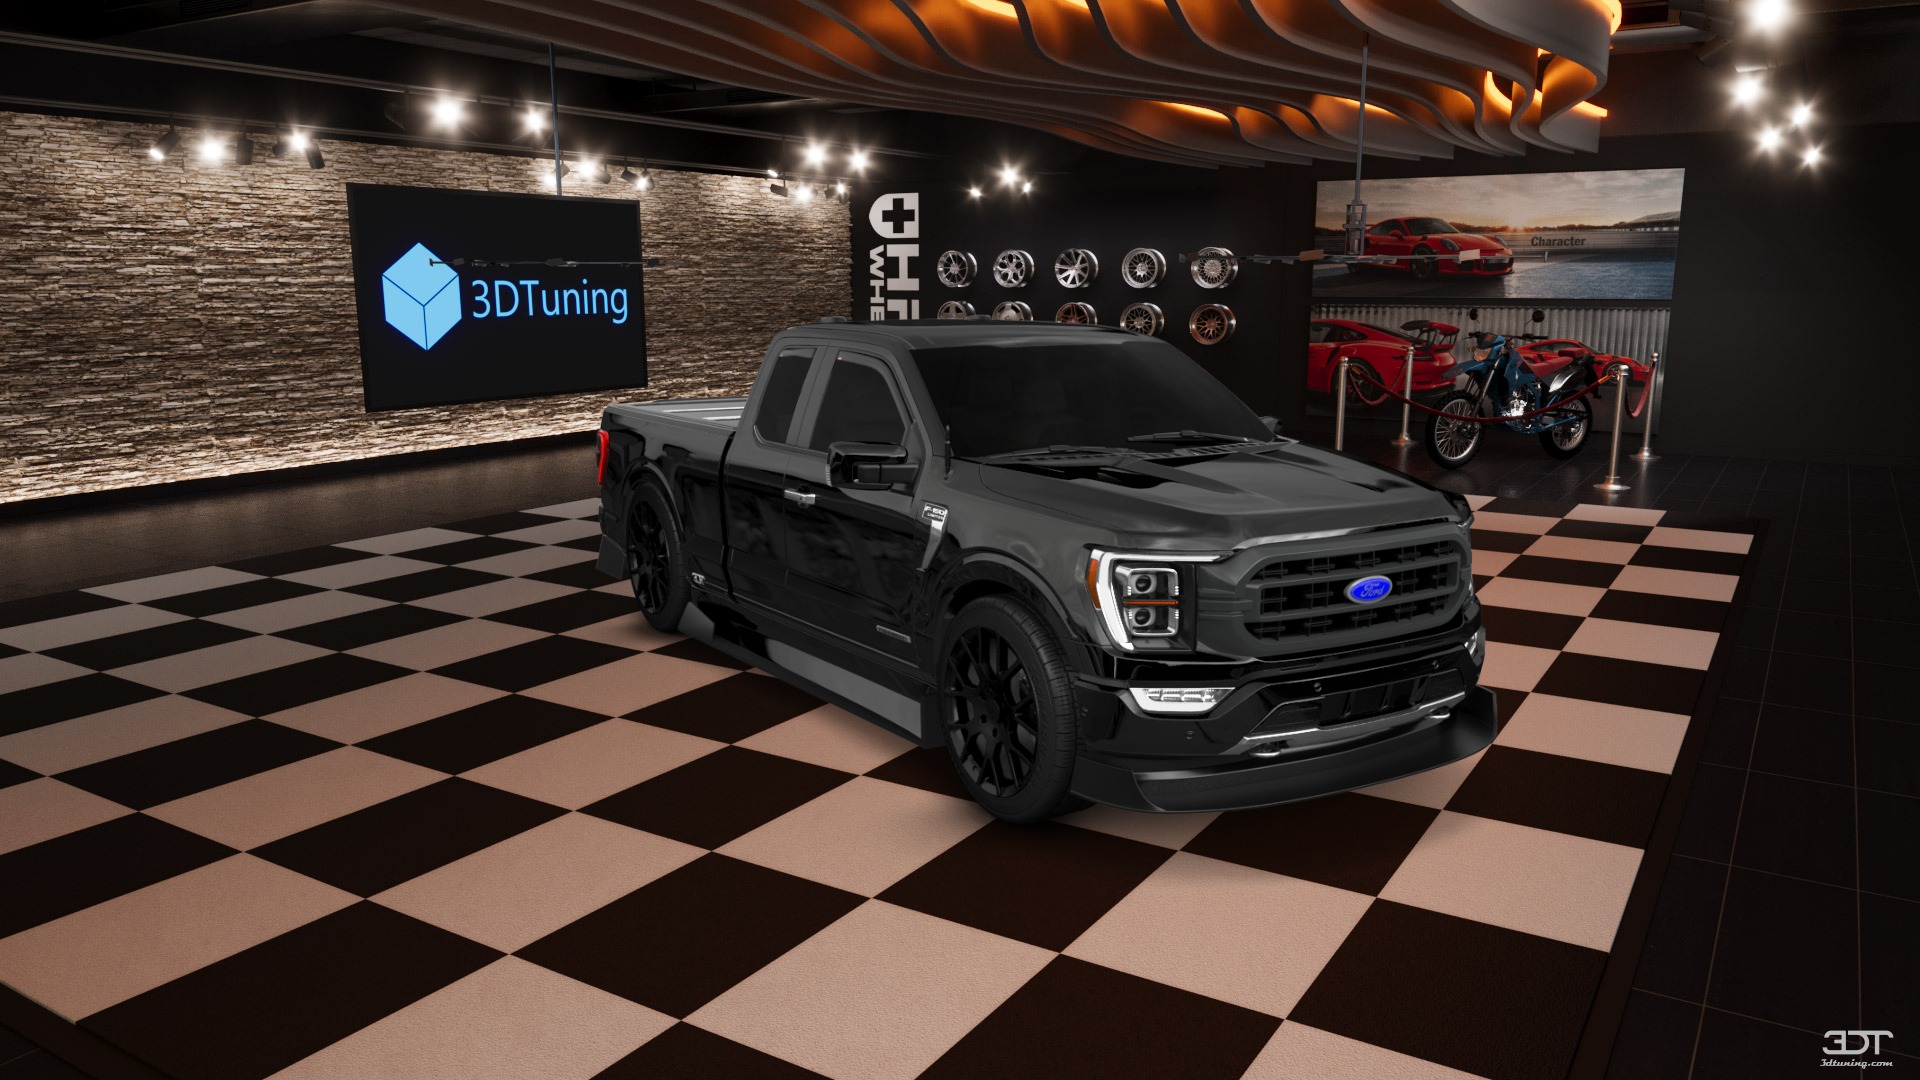 Ford F-150 Double Cab Pickup Truck 2021